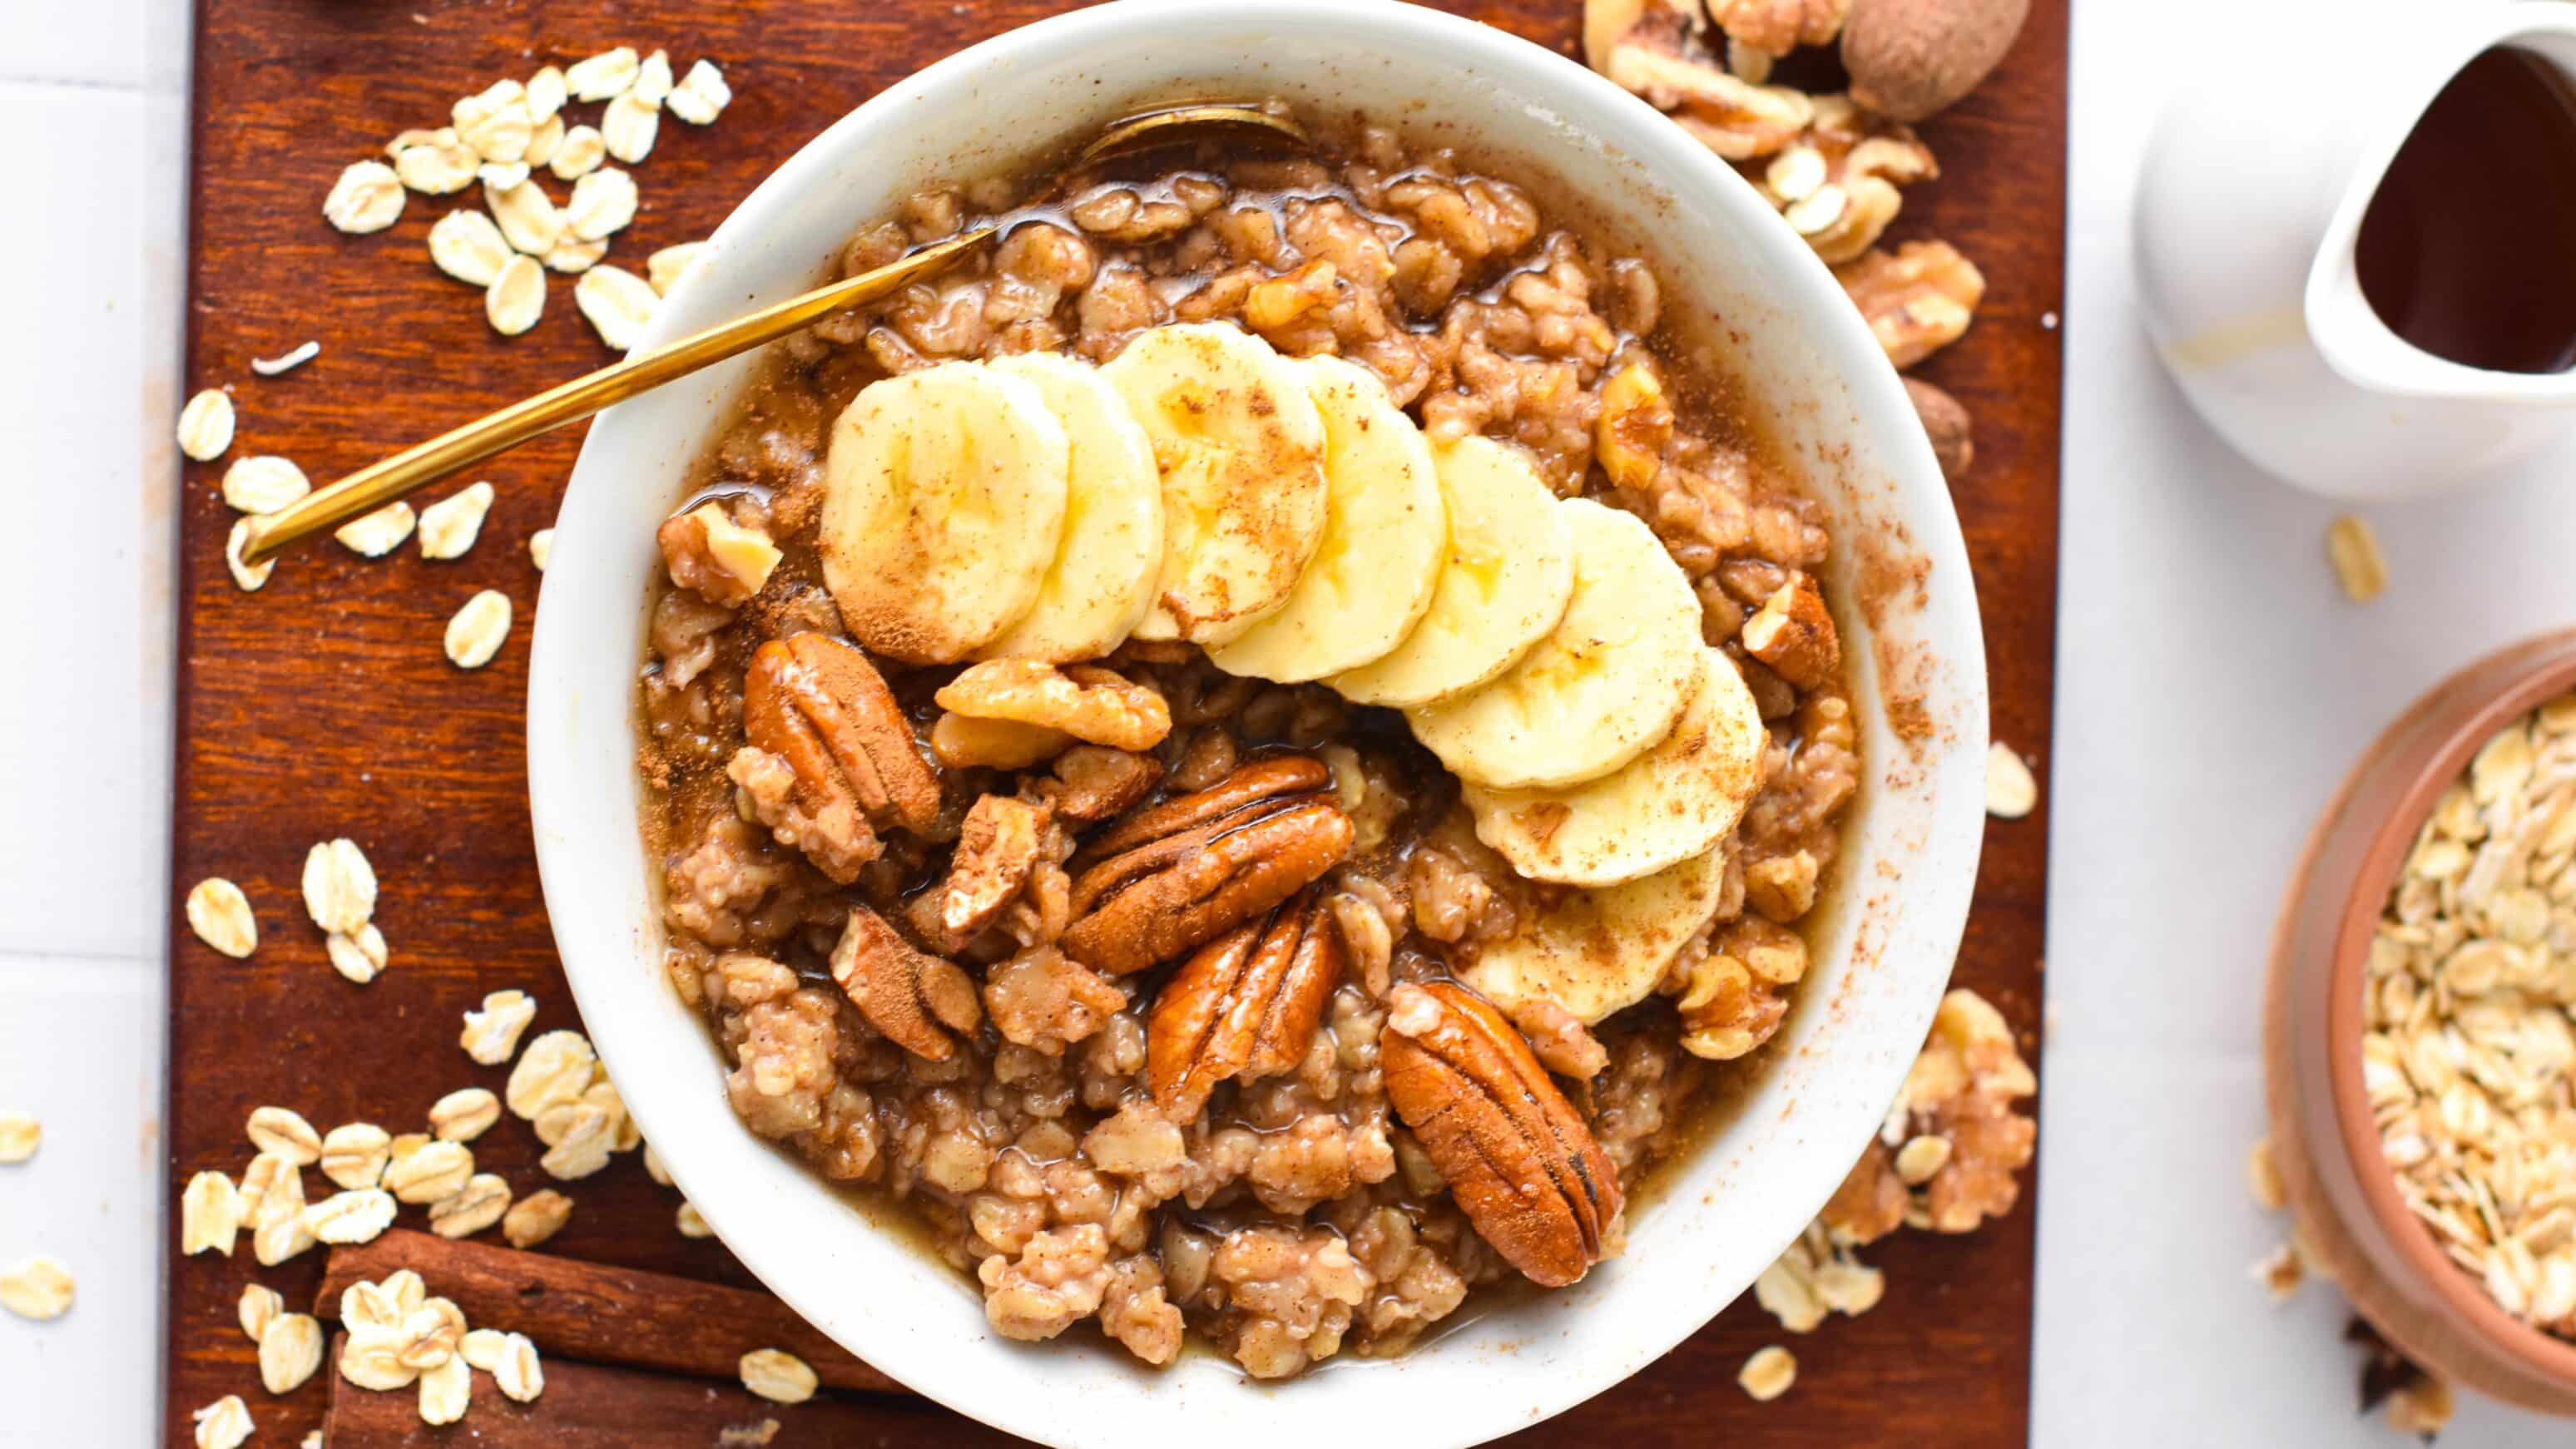 a bowl of cinnamon oatmeal from the top with banana slices, pecans and walnuts